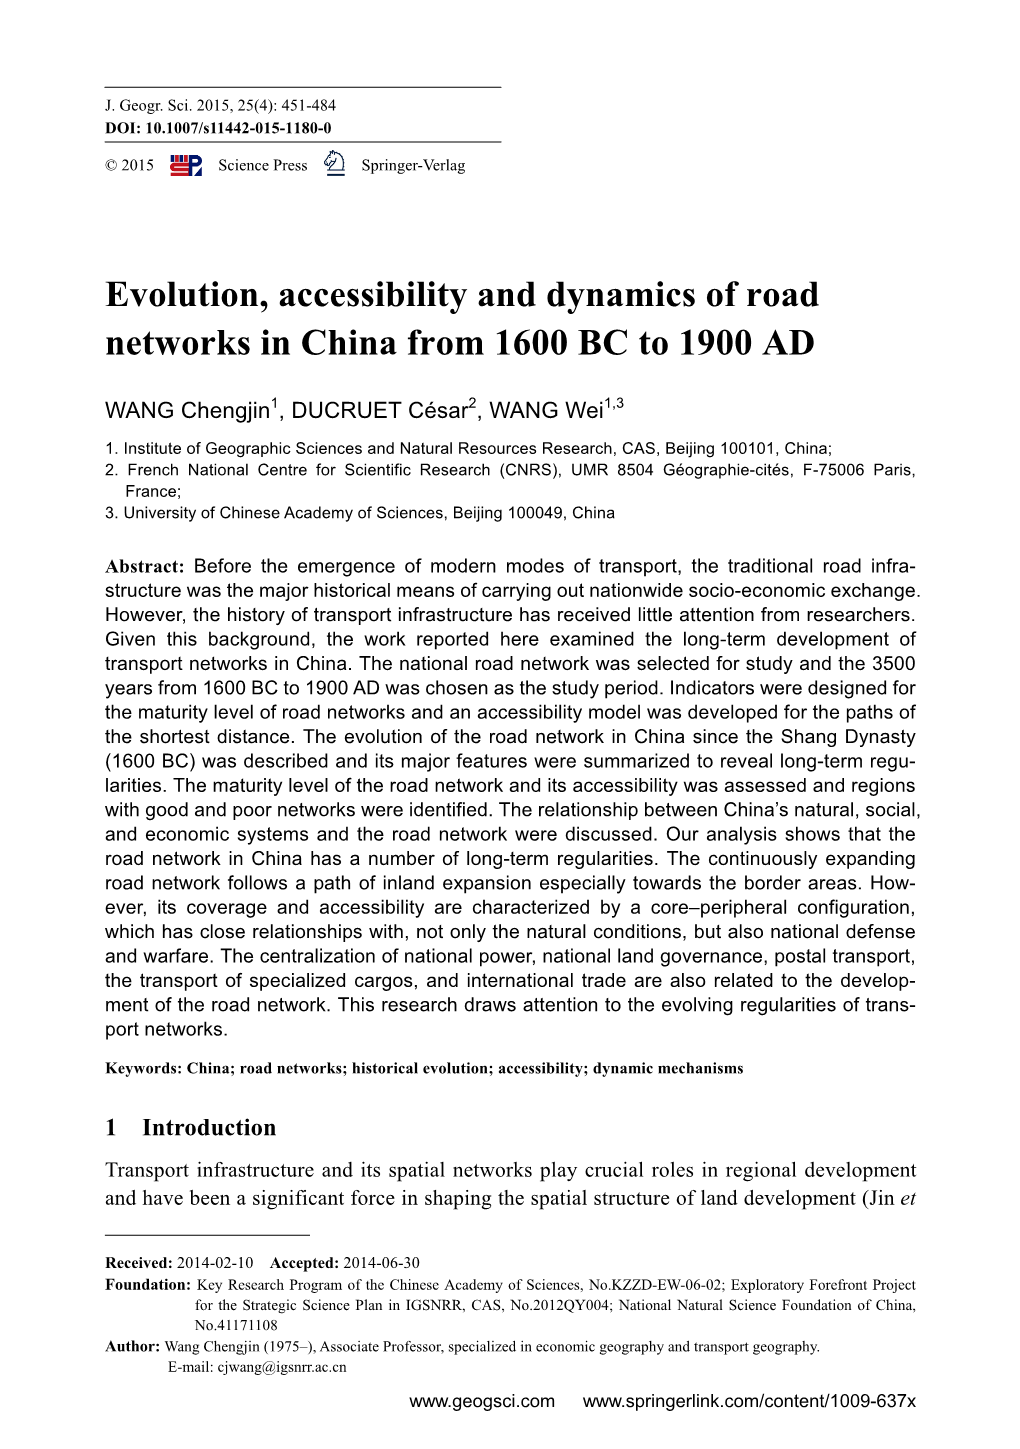 Evolution, Accessibility and Dynamics of Road Networks in China from 1600 BC to 1900 AD